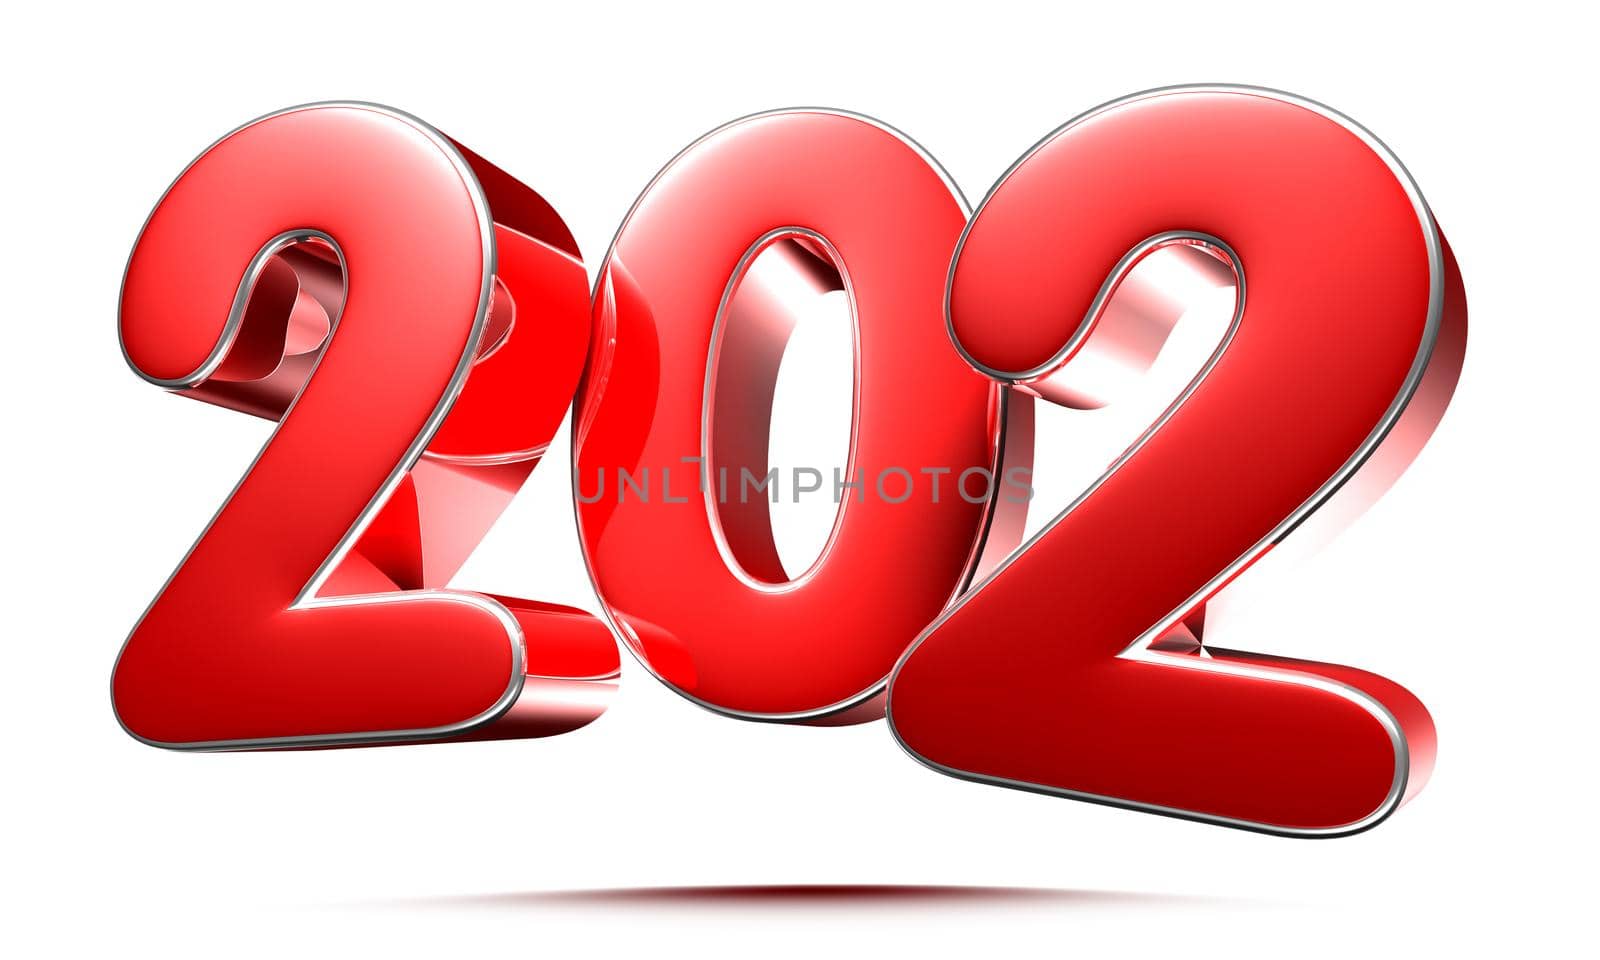 Rounded red numbers 202 on white background 3D illustration with clipping path